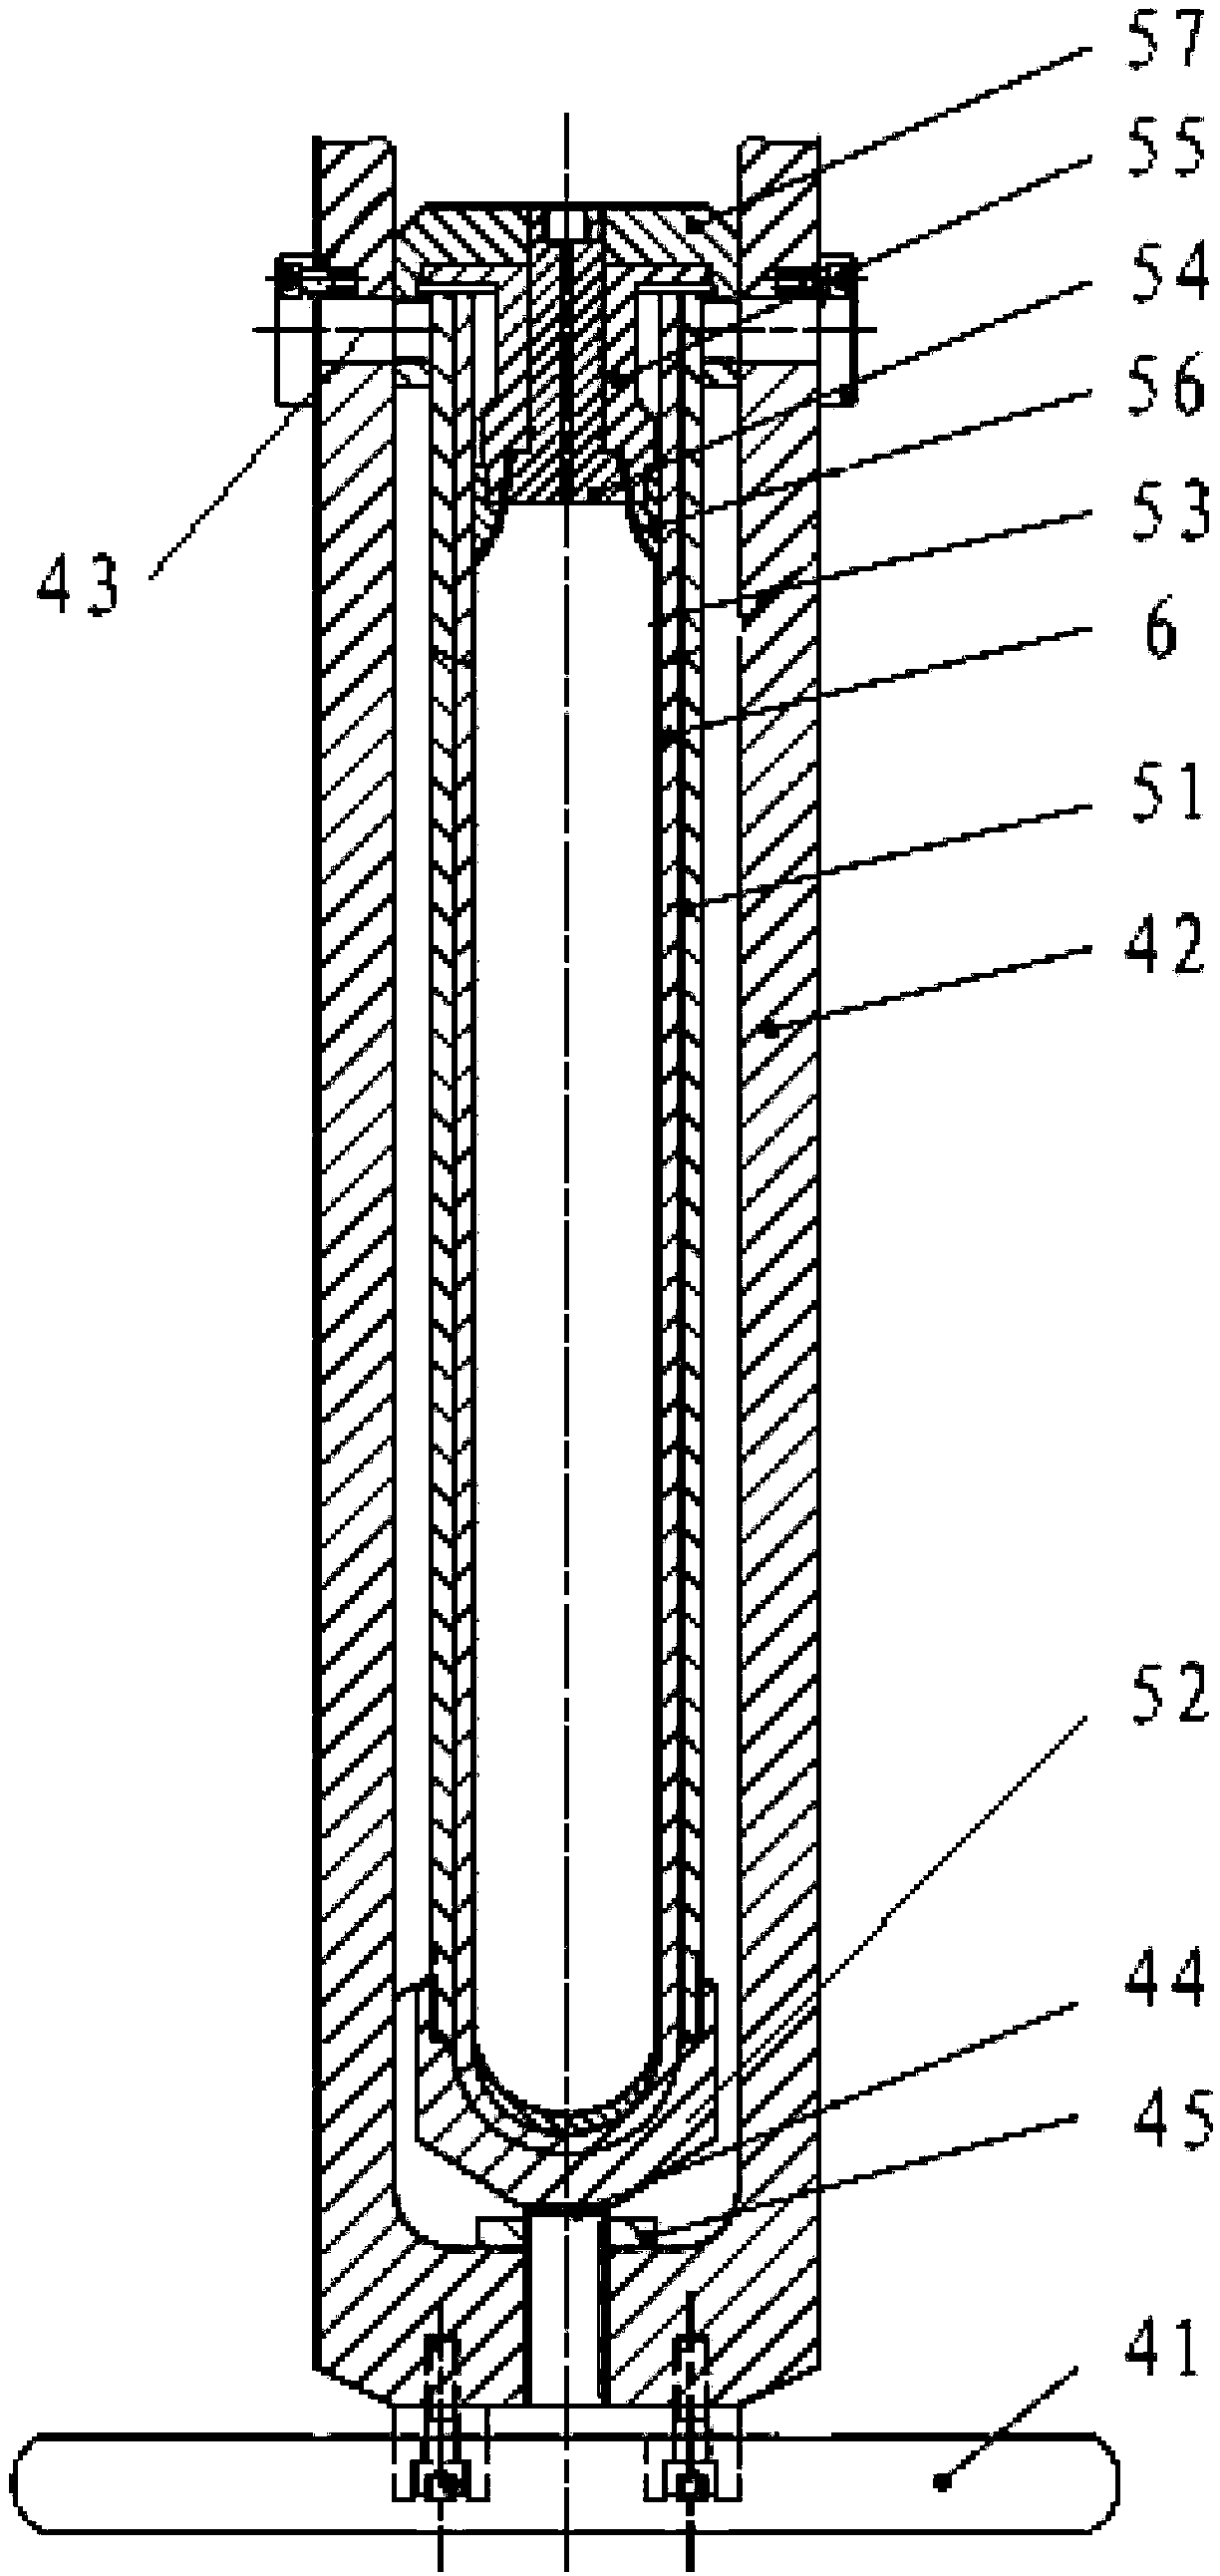 Device used for detecting pressure resistance of ceramic tube